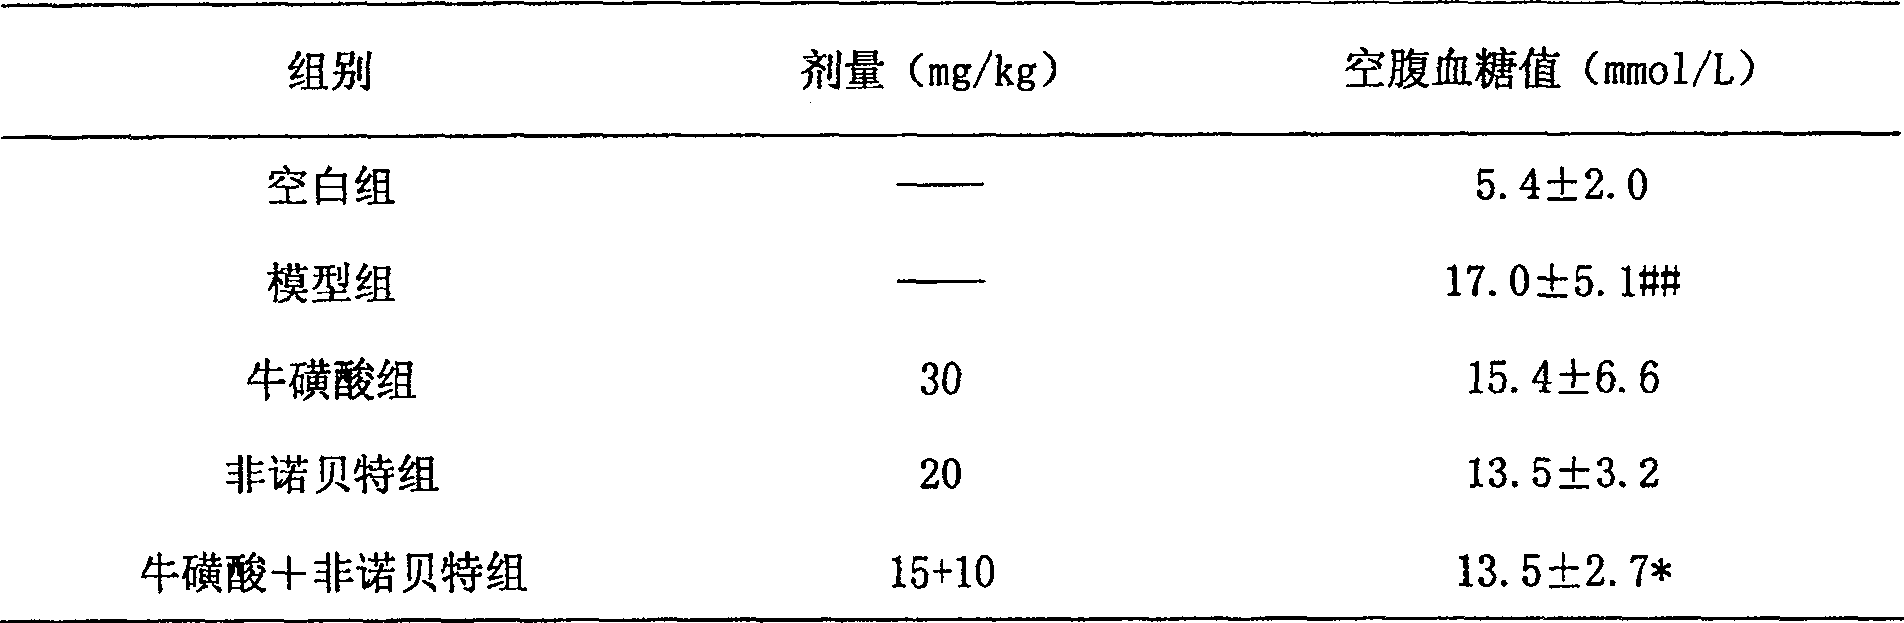 Composition containing fibrate drug and taurine